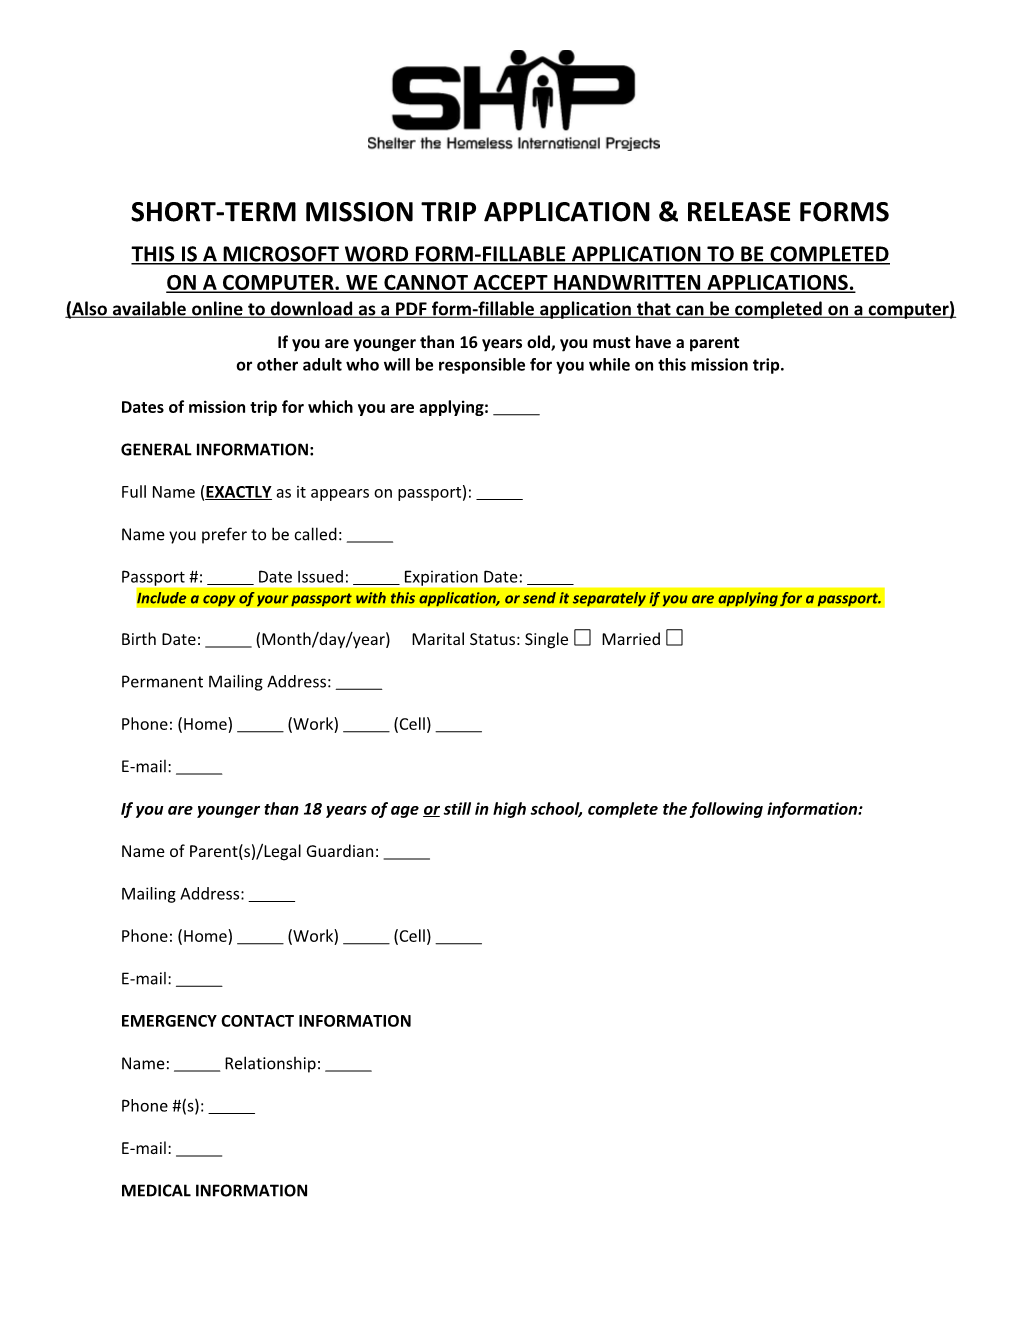 Short-Term Mission Trip Application & Release Forms